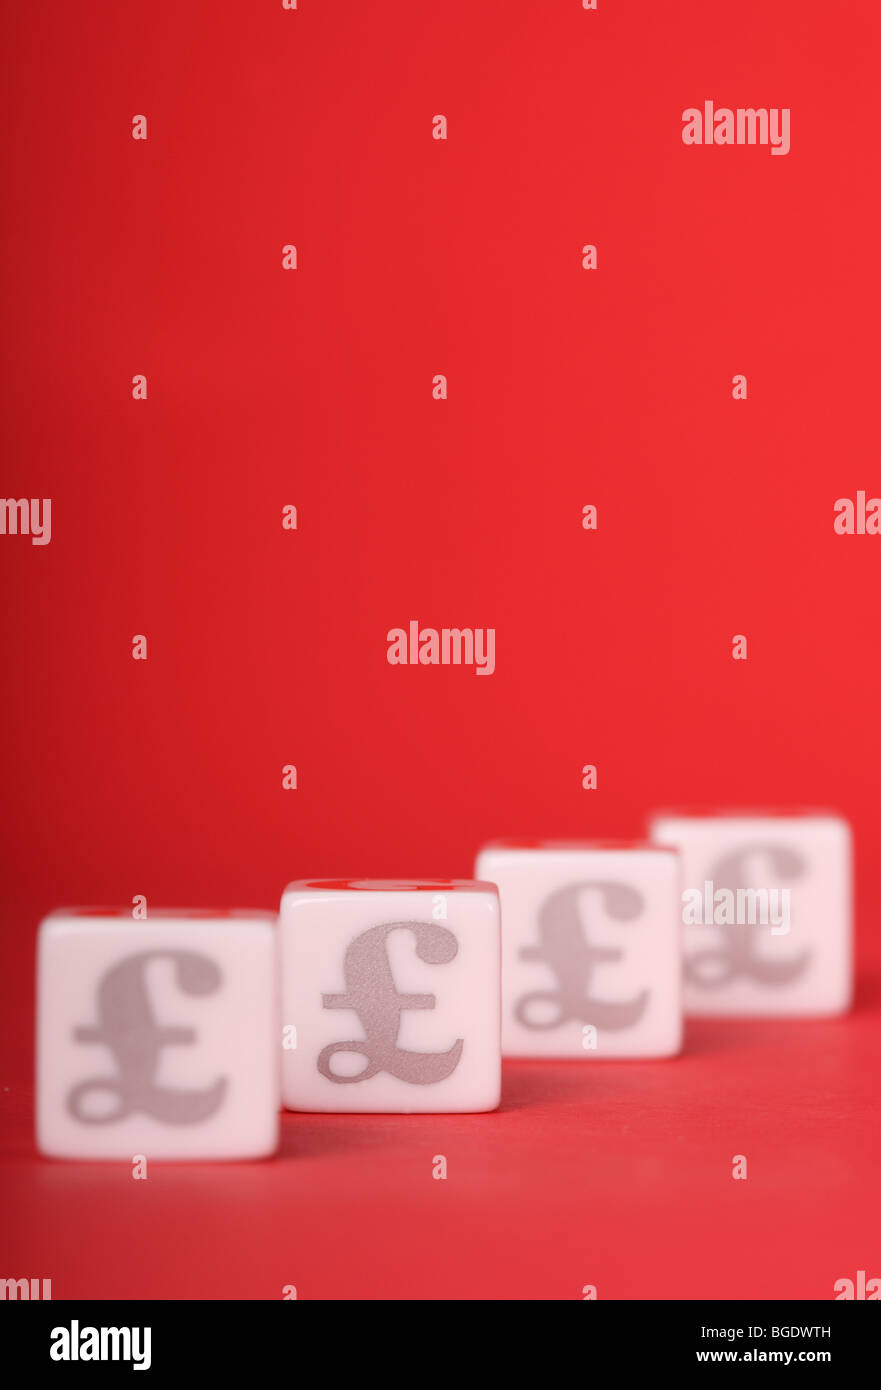 £ Pound Sterling sign on white tiles Stock Photo